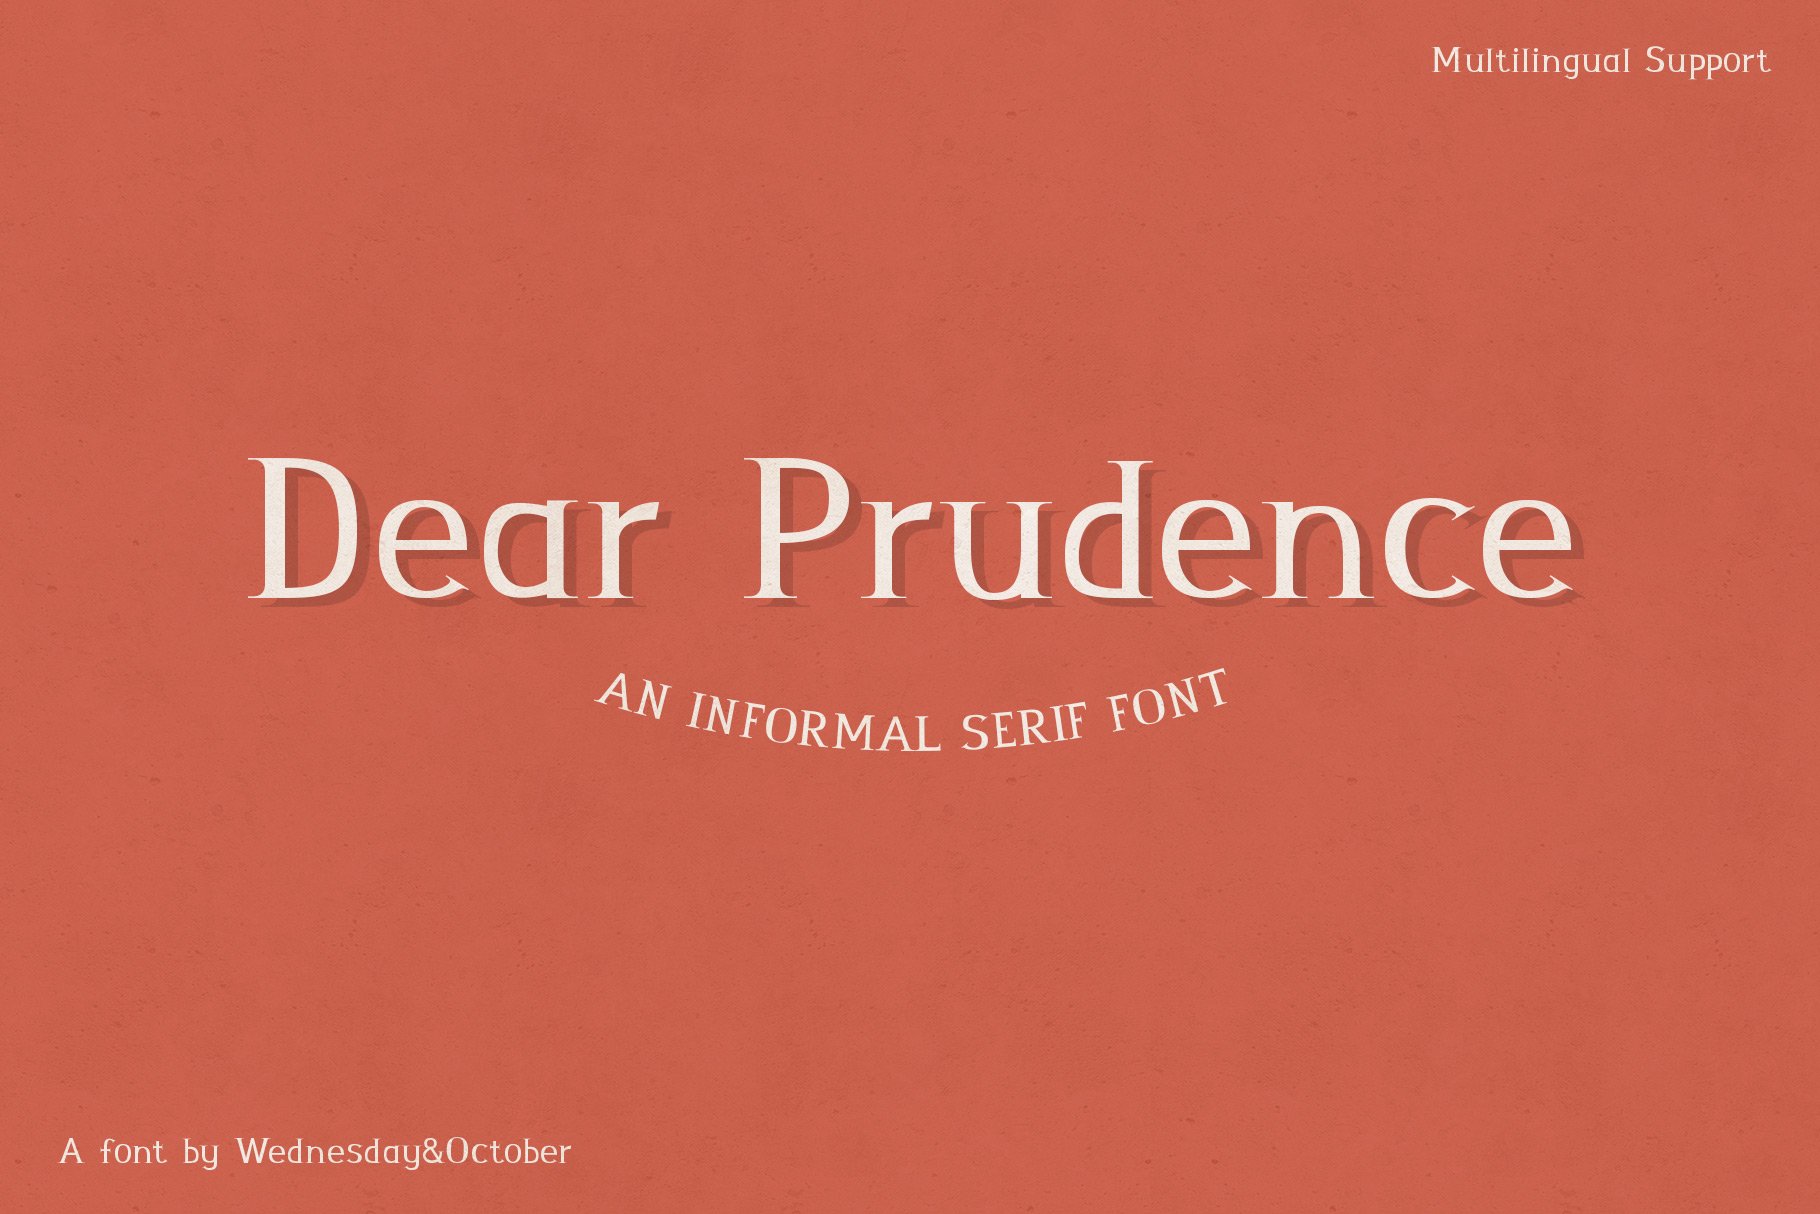 Dear Prudence: A Serif Font cover image.